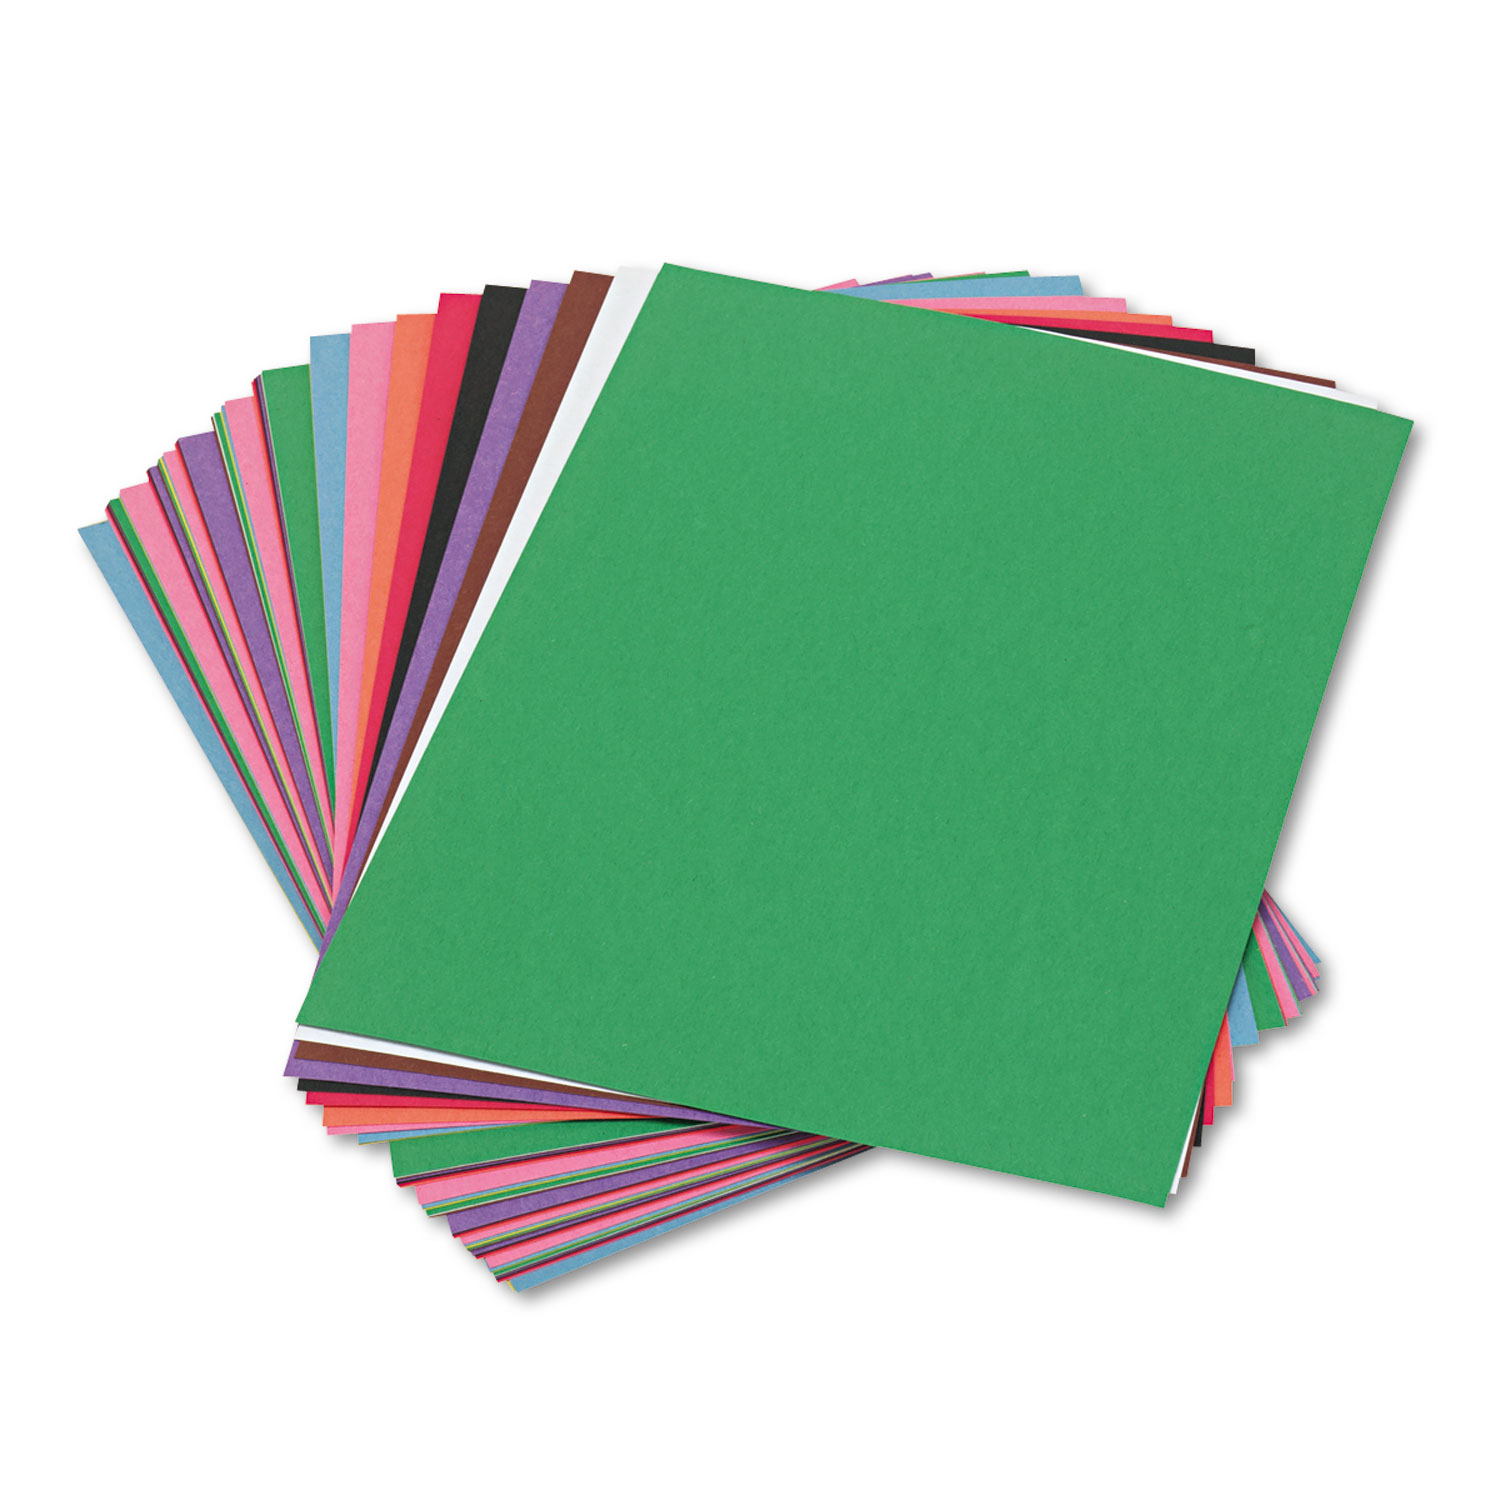 Construction Paper, Bright White, 12 x 18, 50 Sheets - PAC8707